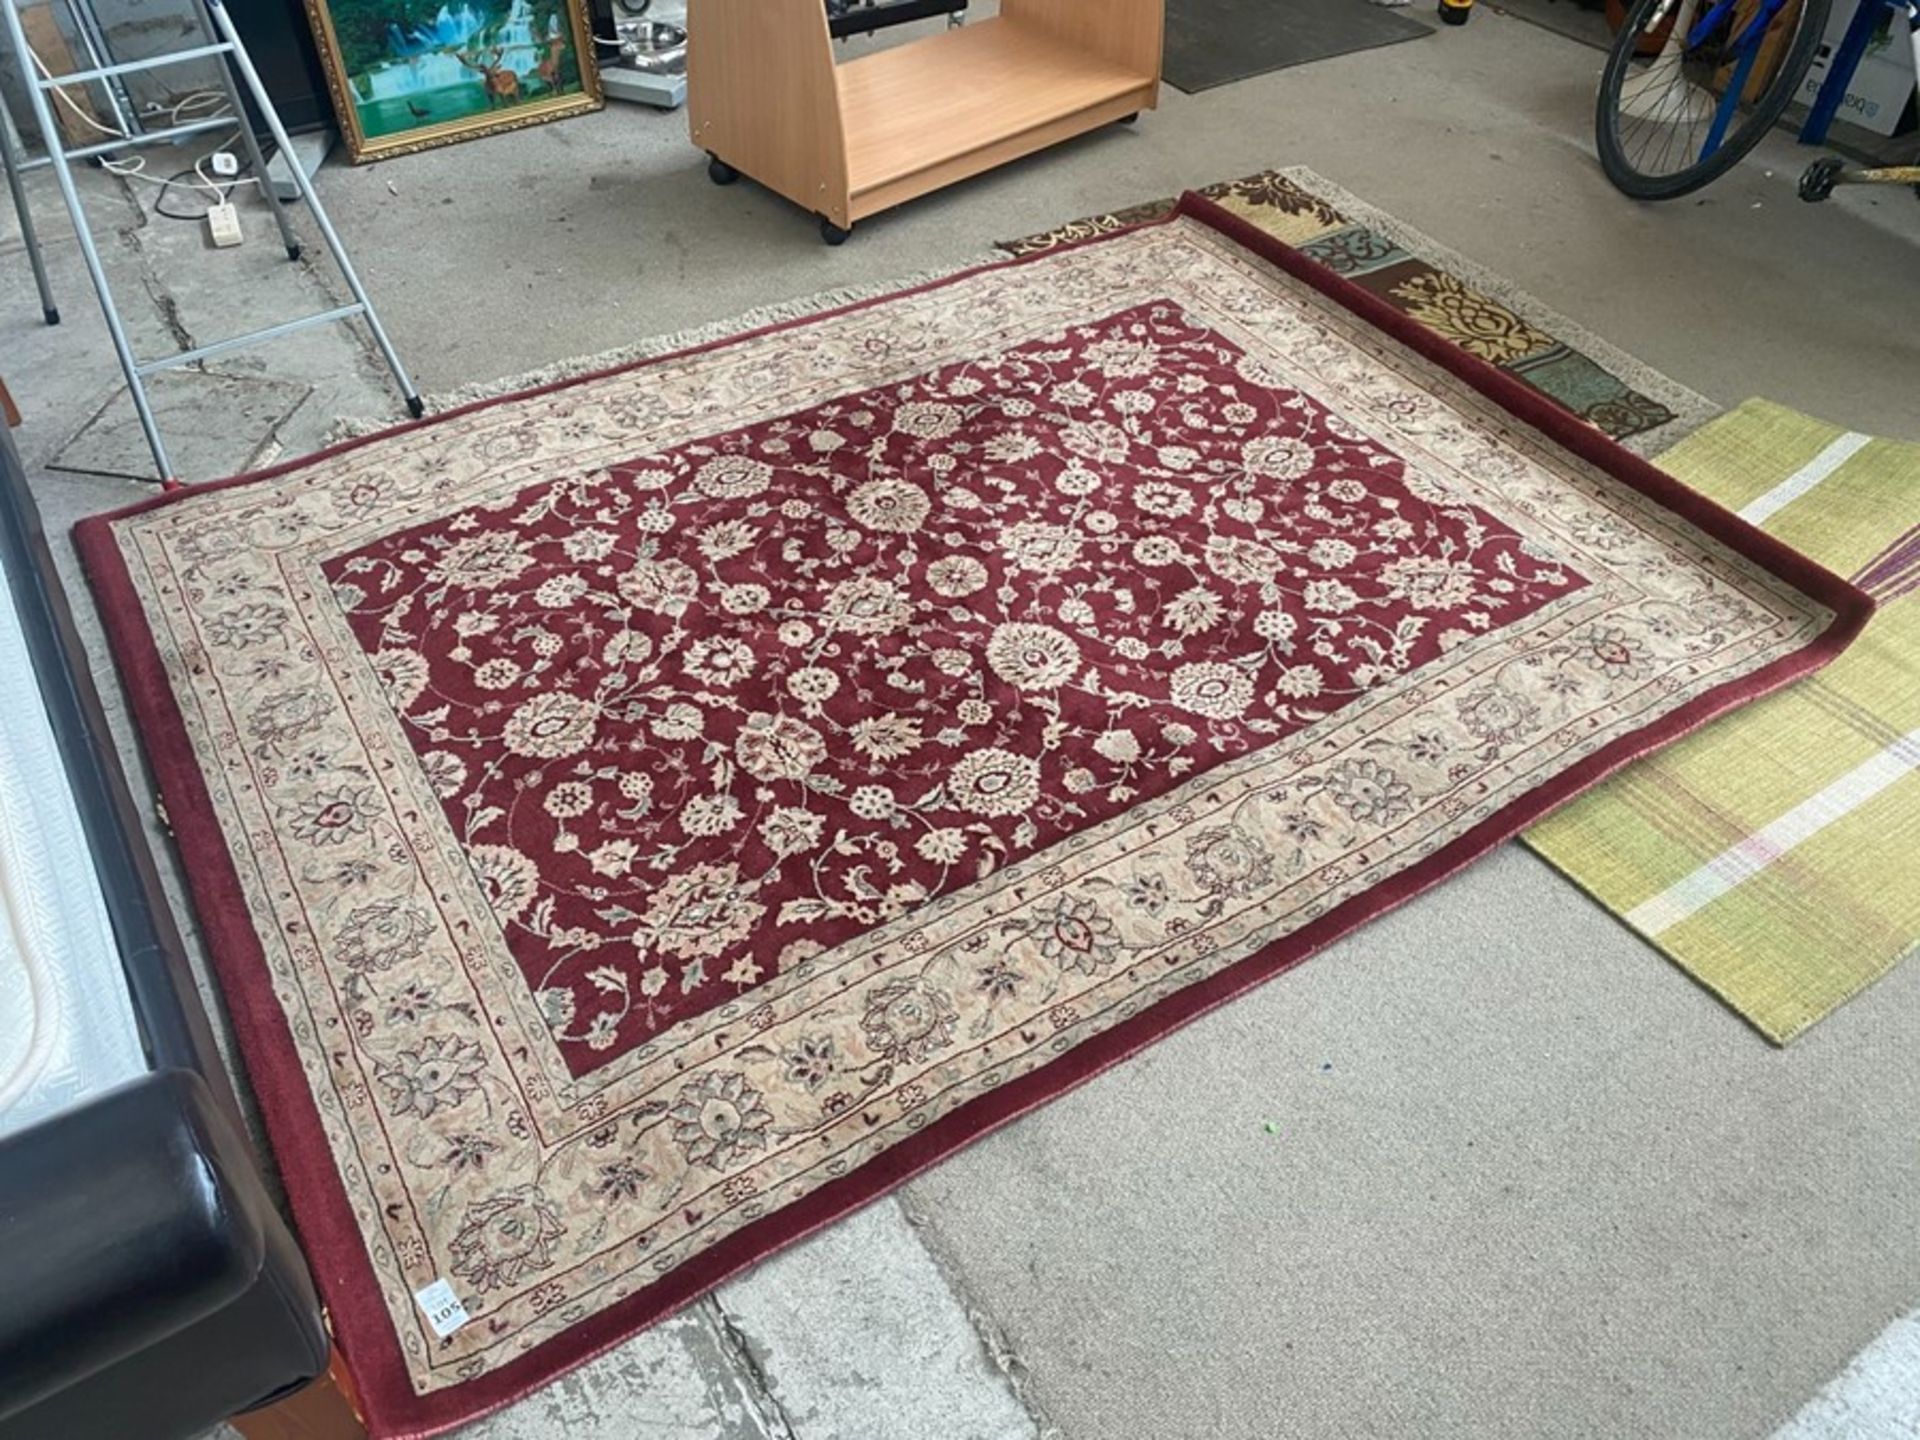 LARGE CLEAN RED PATTERNED RUG